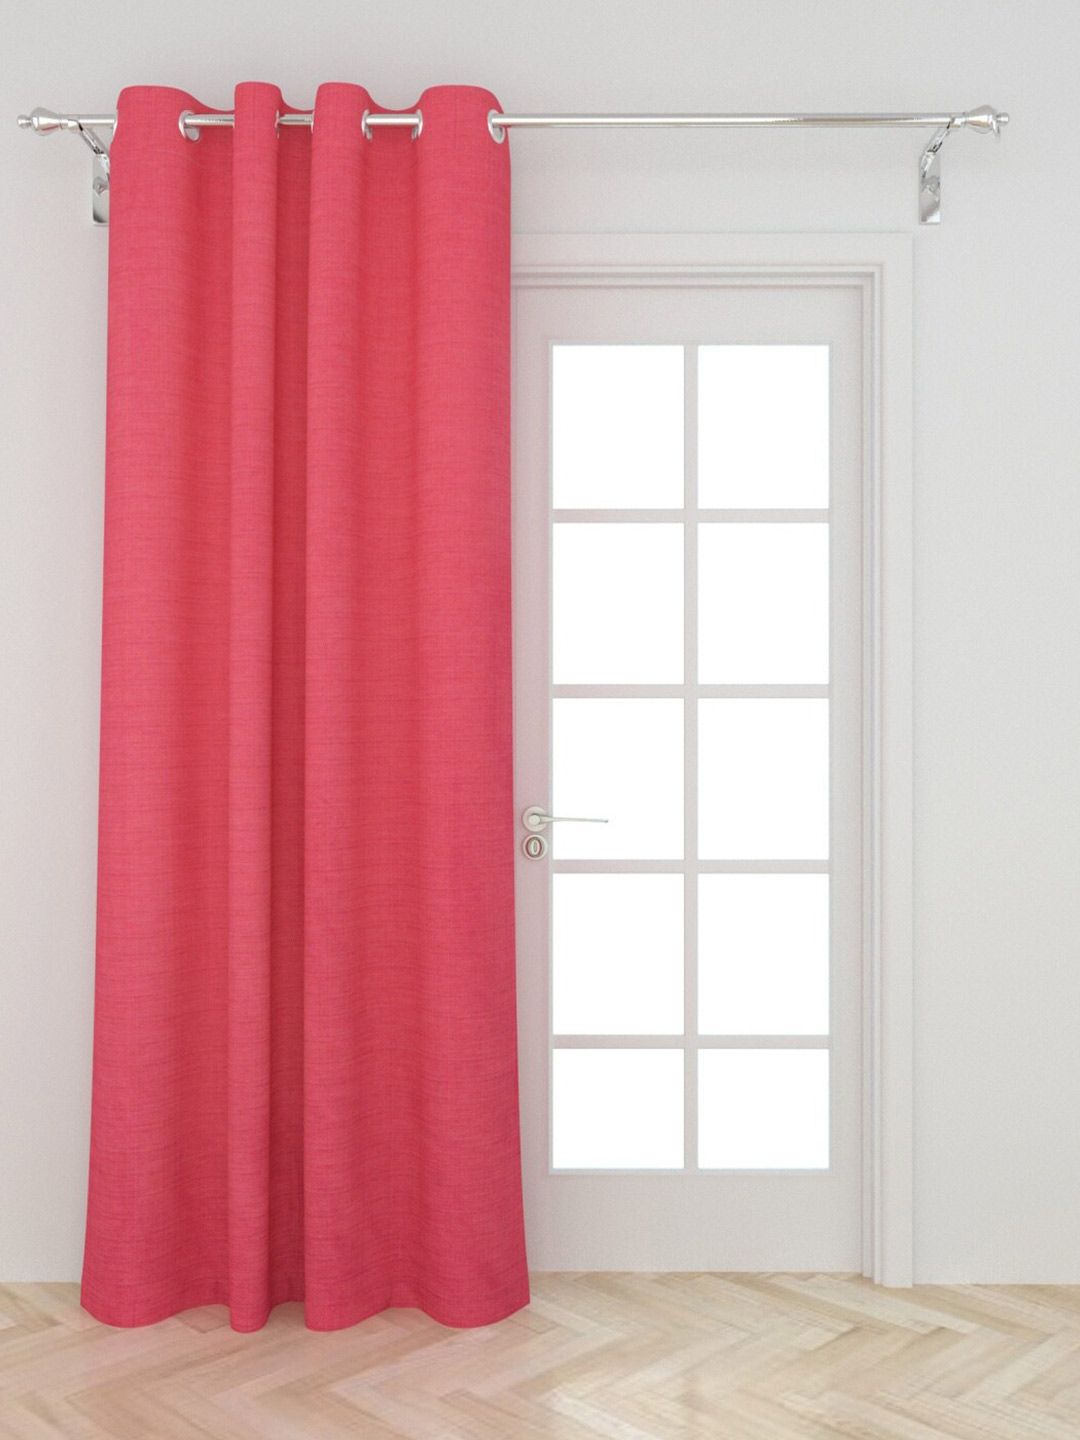 Home Centre Red Door Curtain Price in India